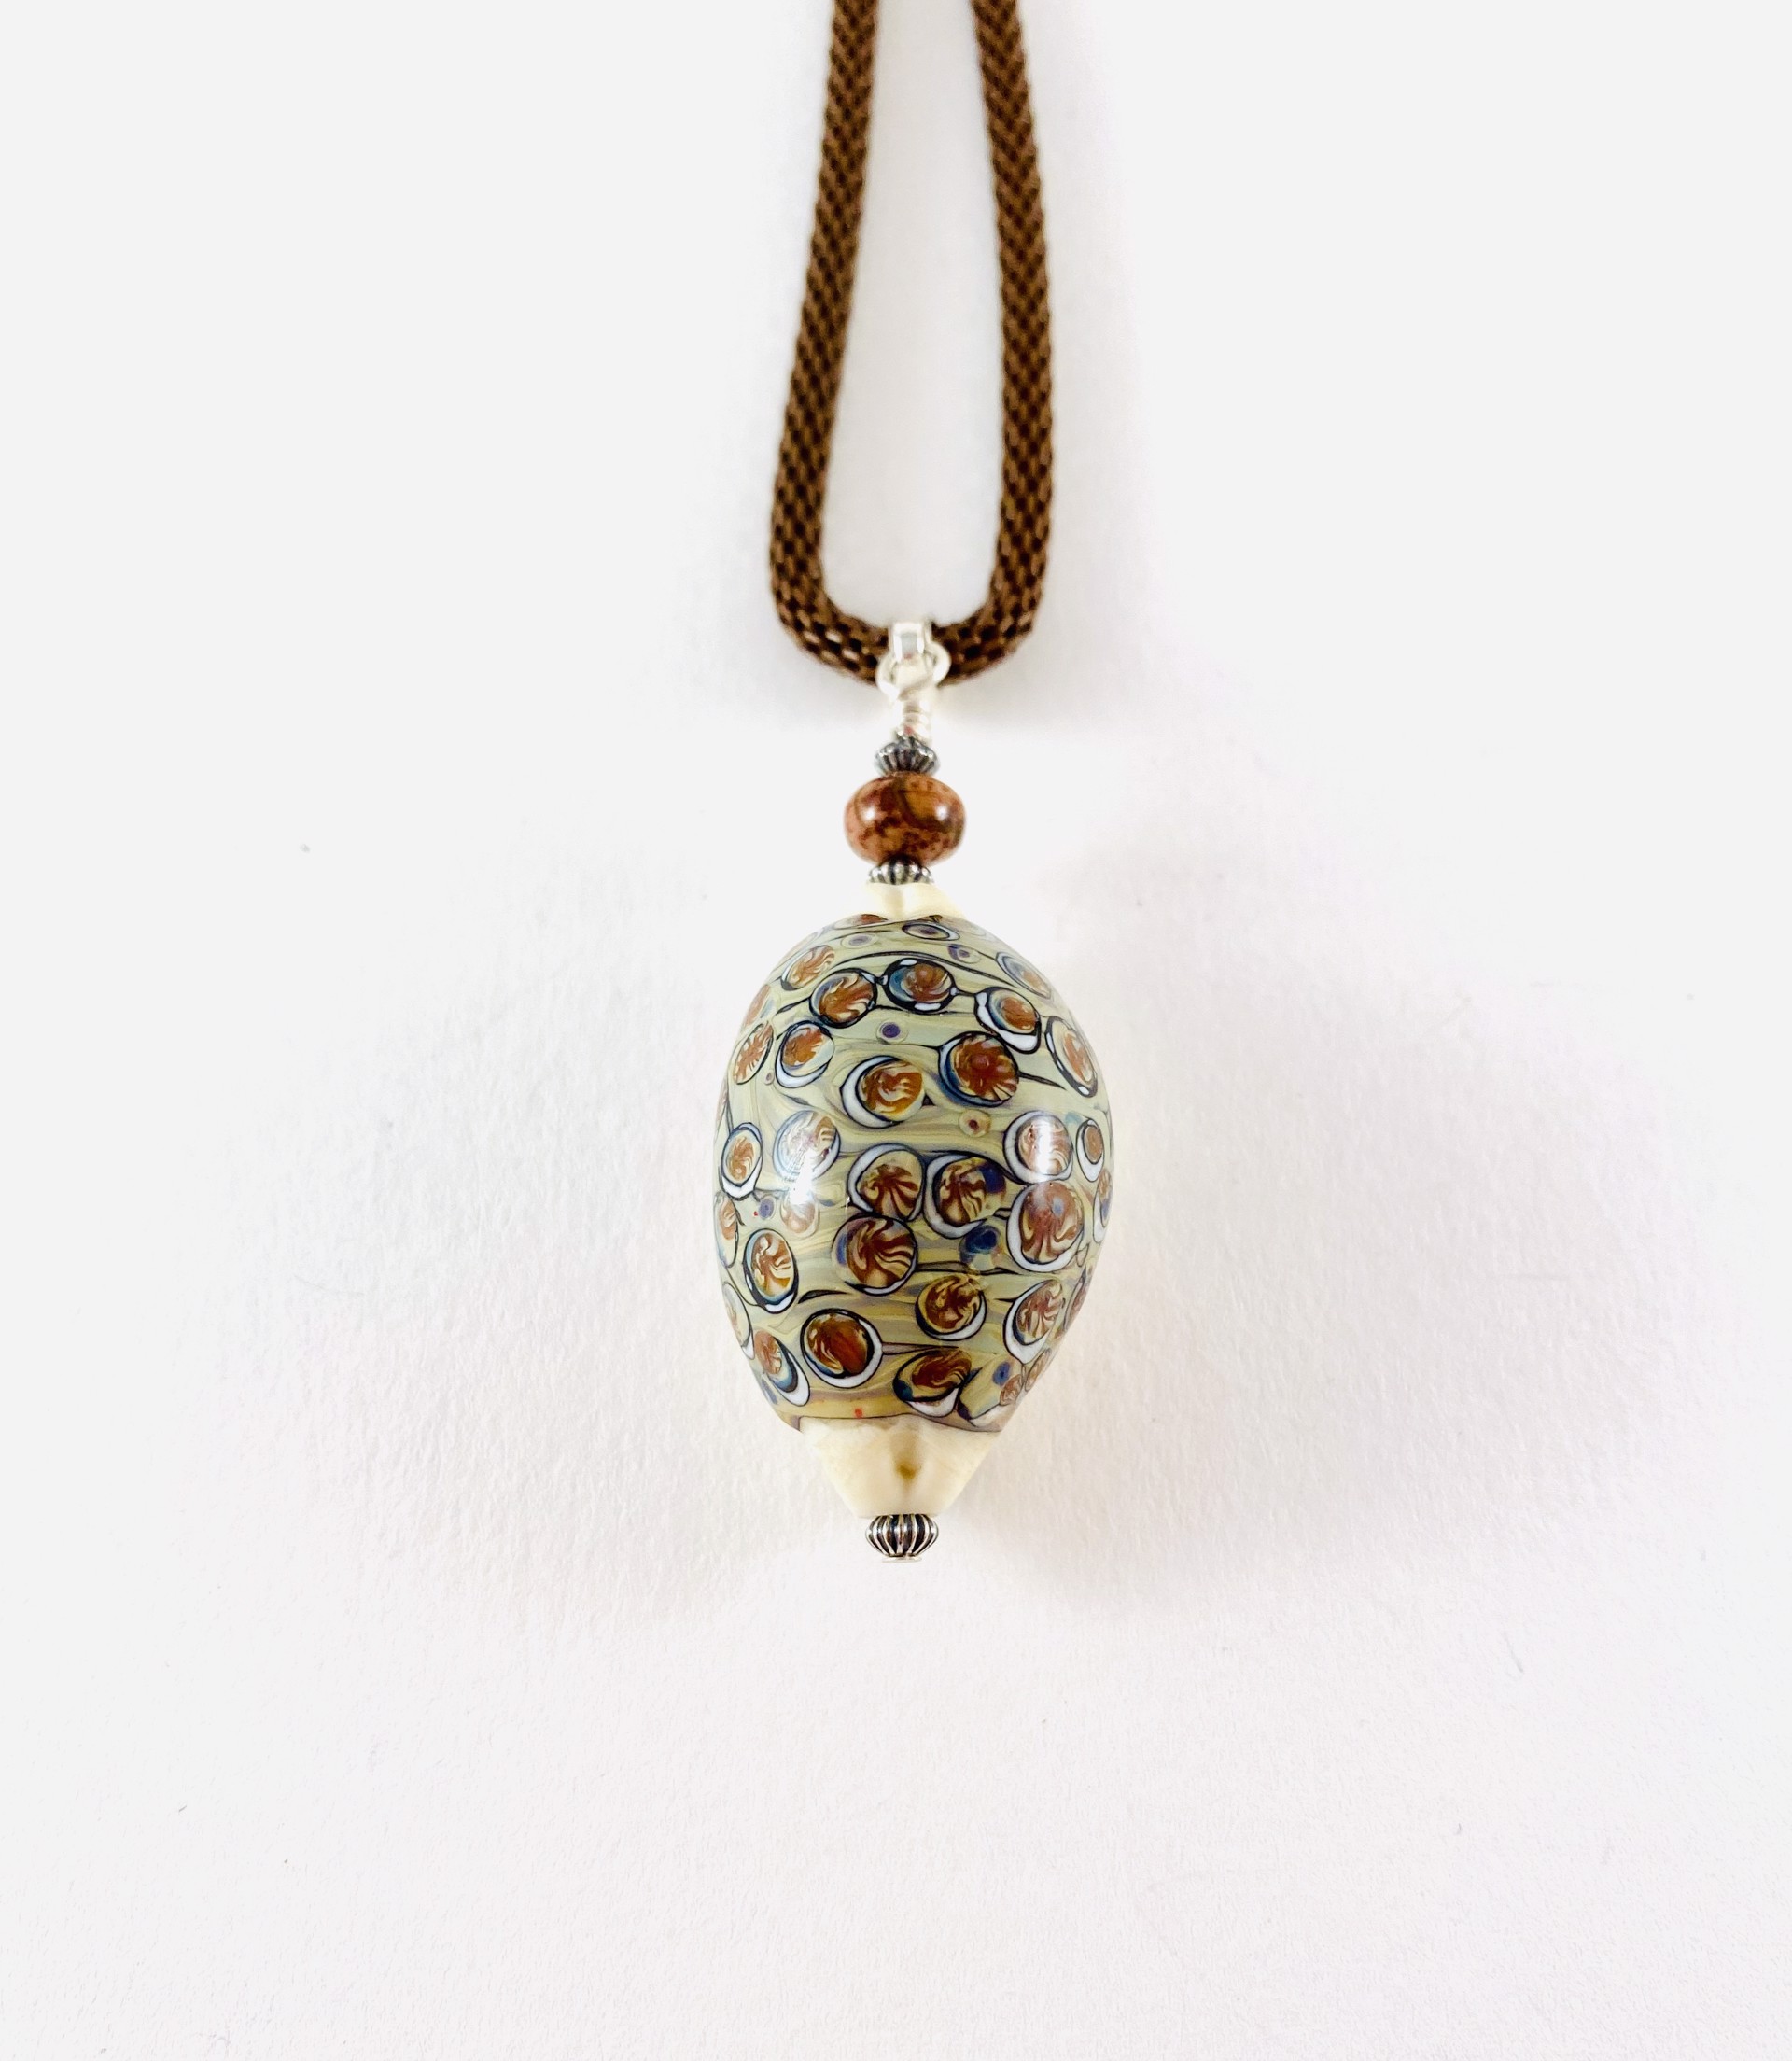 Cowrie Shell Pendant, mesh necklace by Linda Sacra